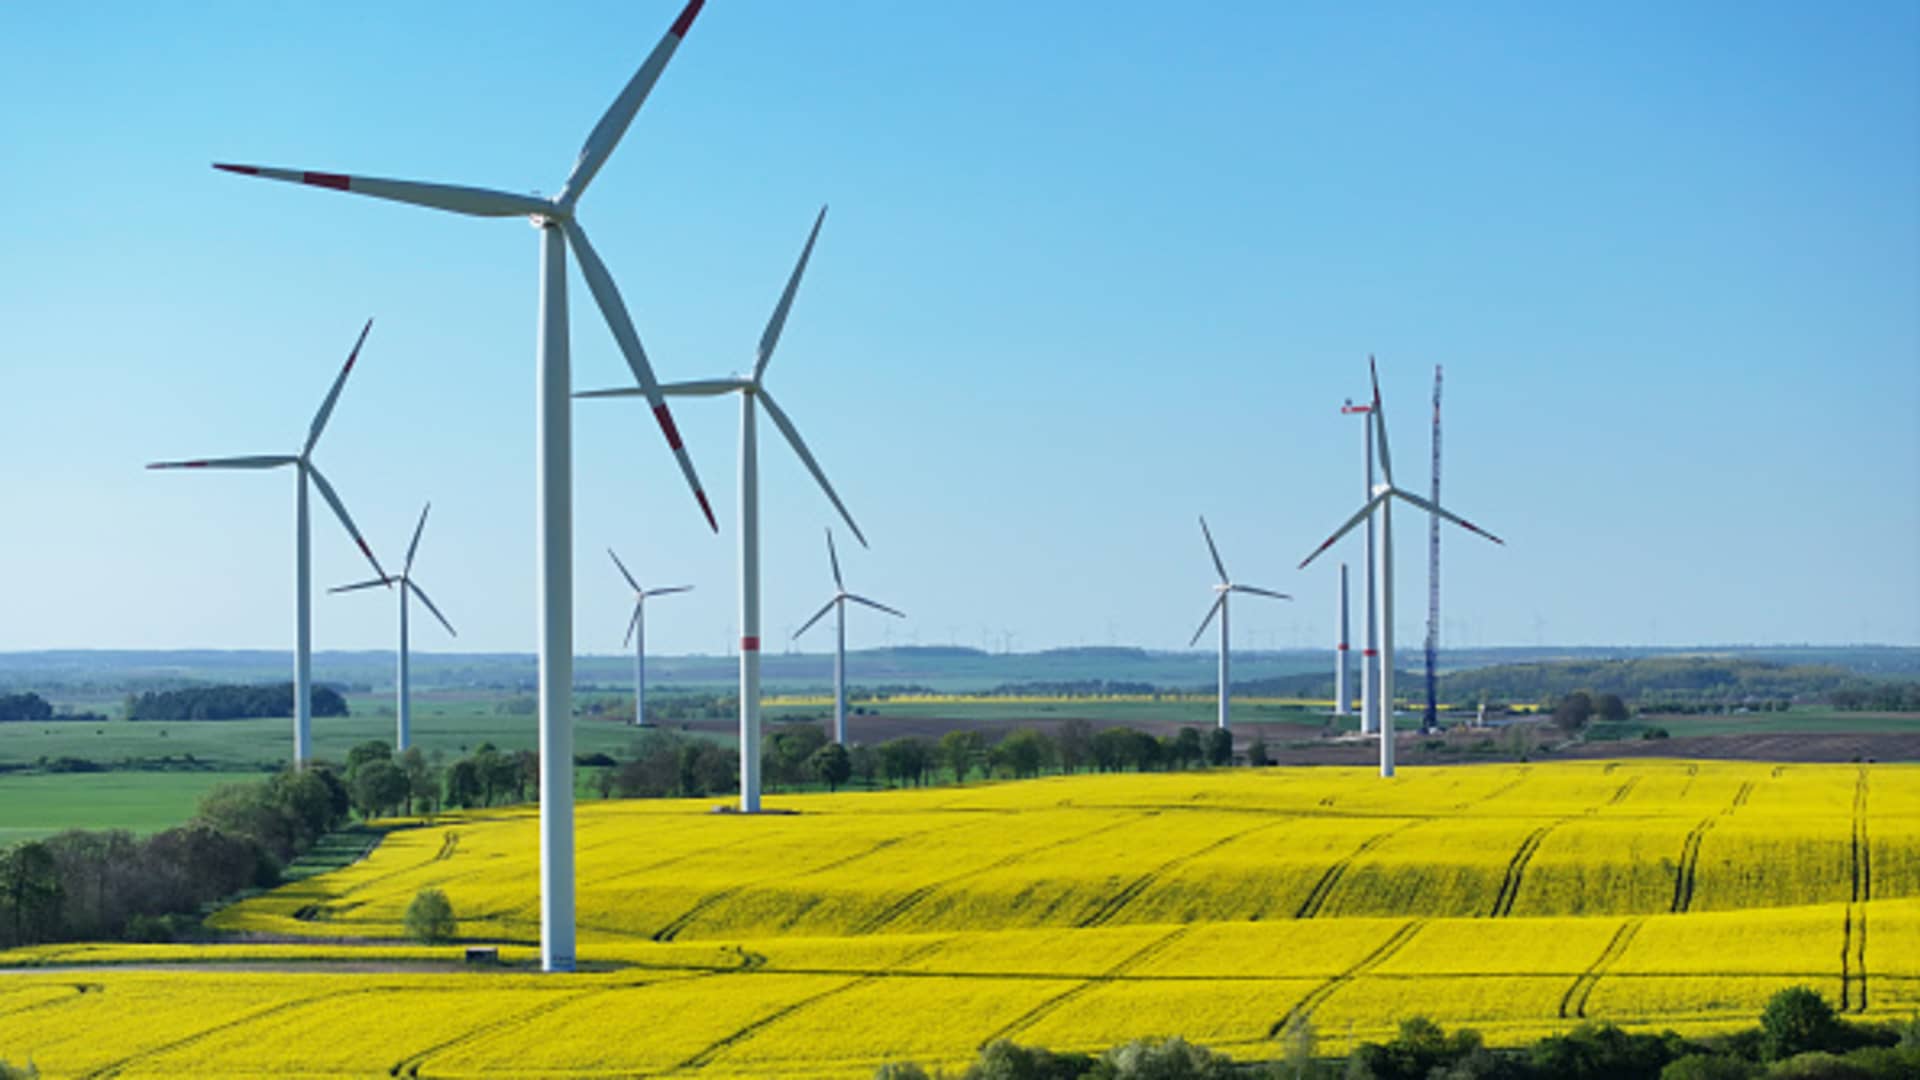 'Once-in-a-lifetime' opportunity: Morgan Stanley's stocks to trade Europe's renewable energy boom